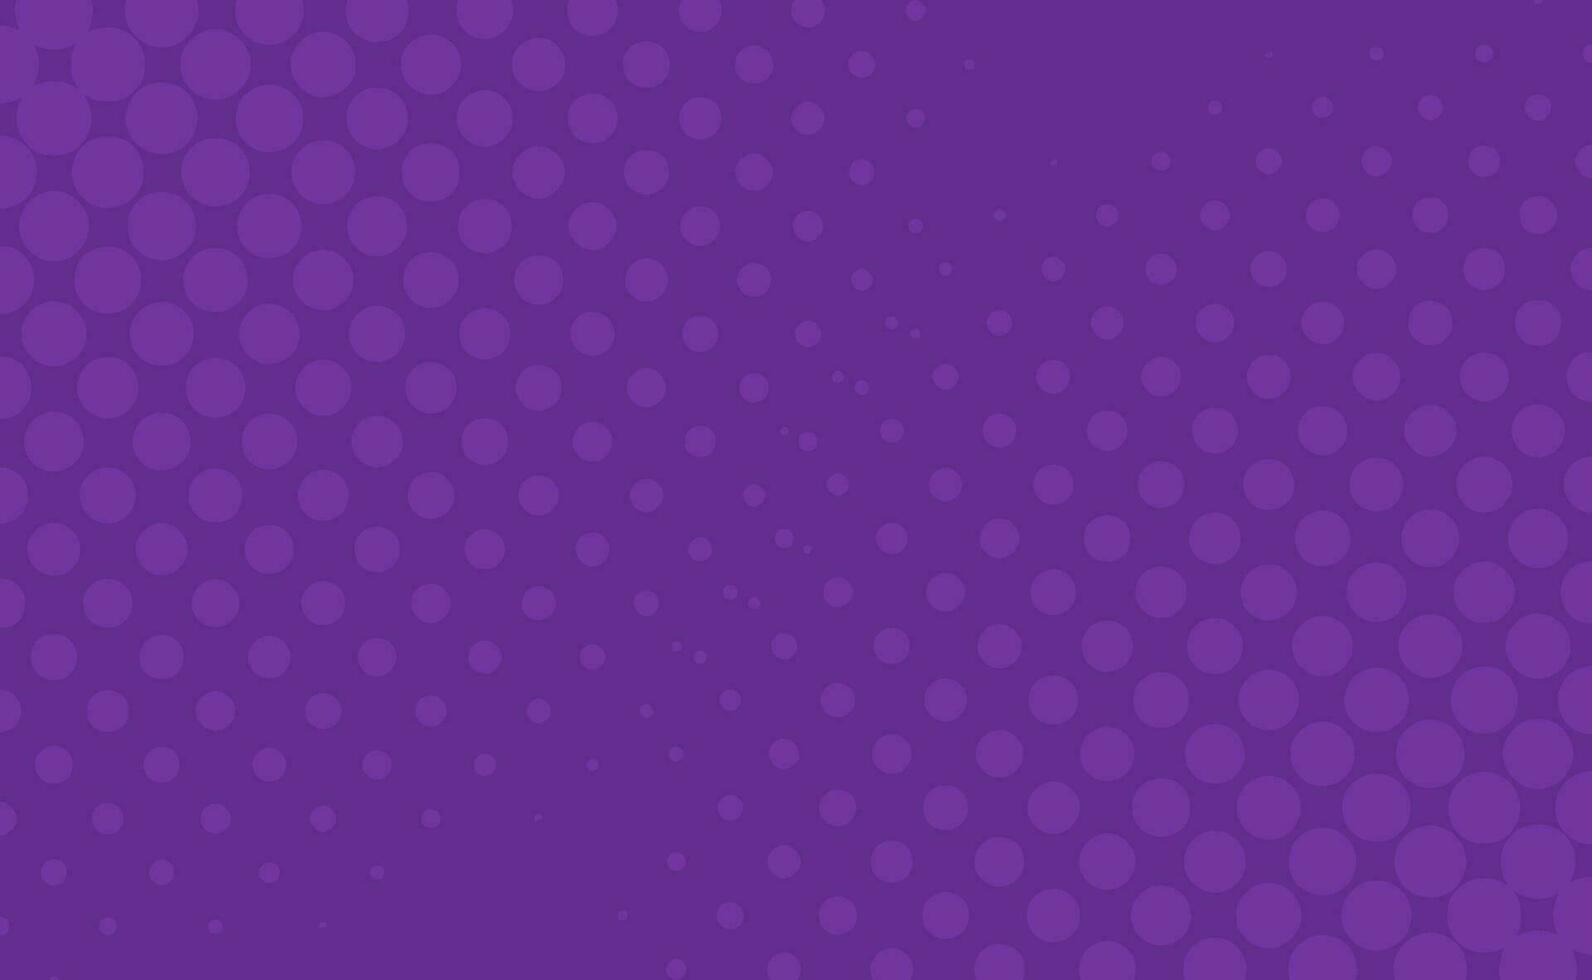 Purple abstract background free vector design